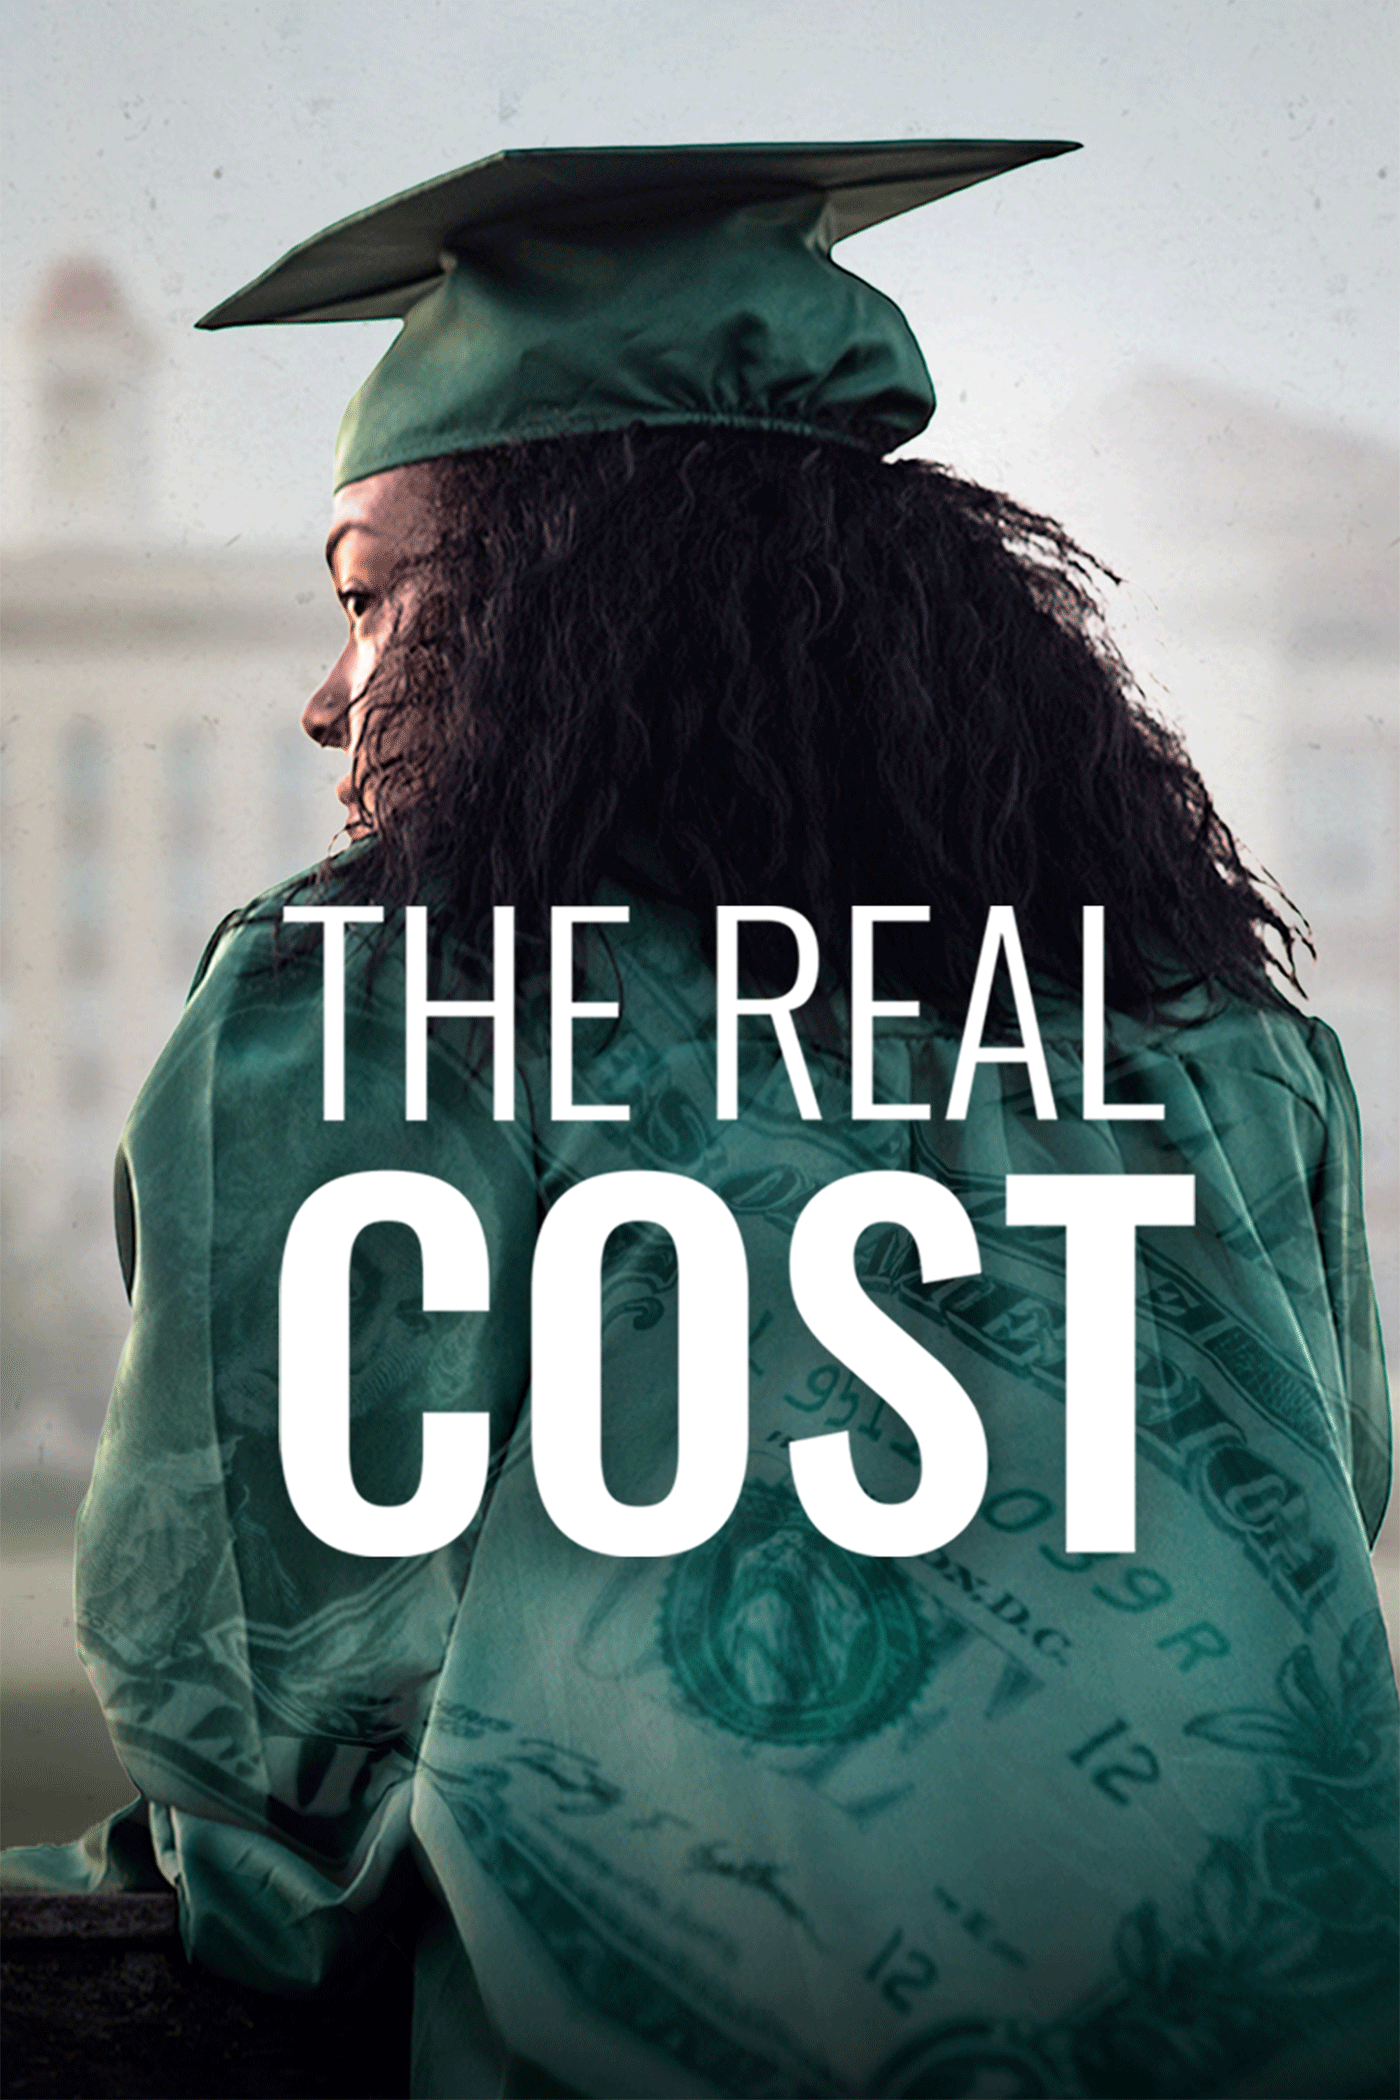 The Real Cost